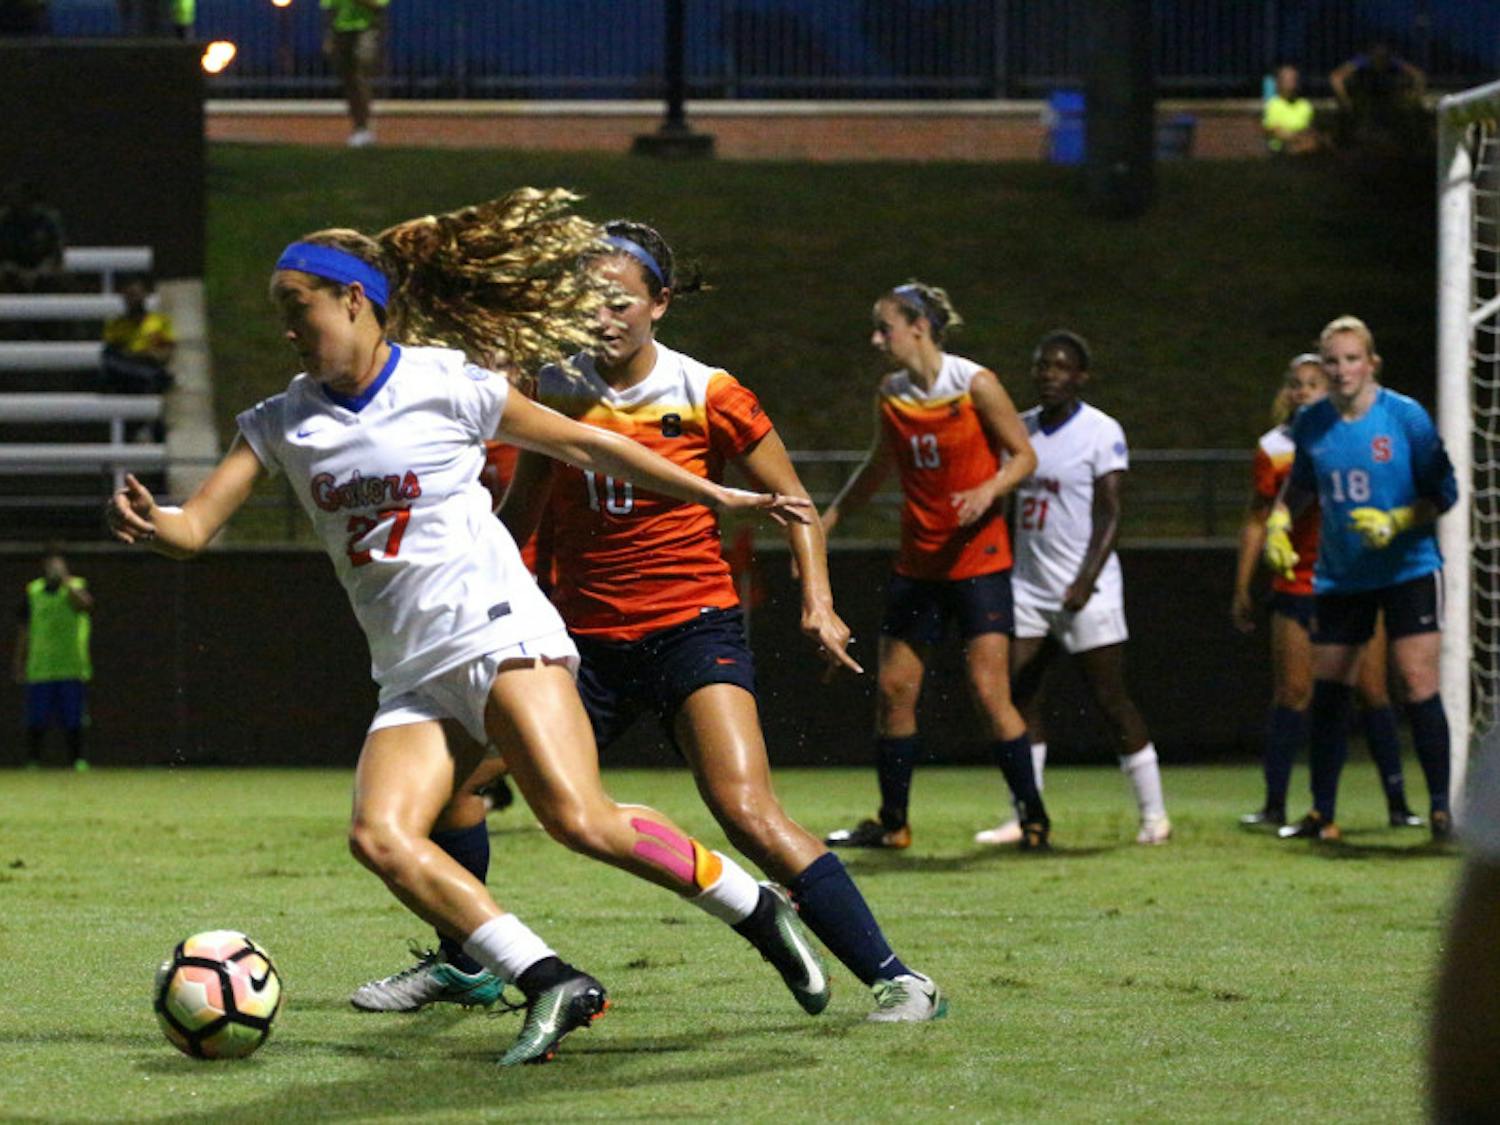 Mayra Pelayo controls the ball with a defender behind her during Florida's 2-1 win against Syracuse on Aug. 27, 2017, at Donald R. Dizney Stadium.